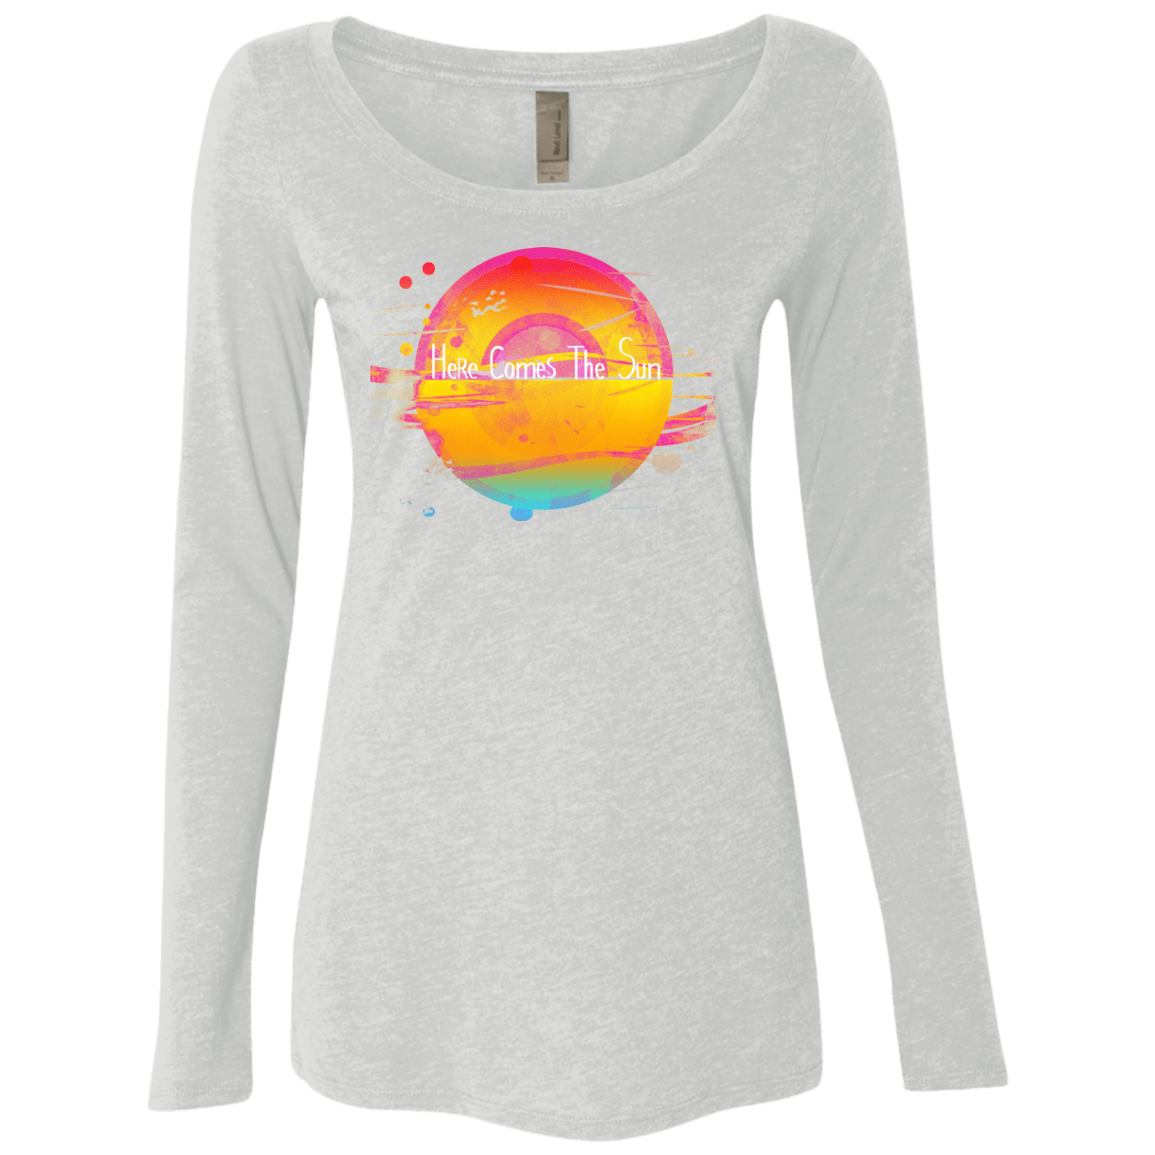 T-Shirts Heather White / S Here Comes The Sun (2) Women's Triblend Long Sleeve Shirt